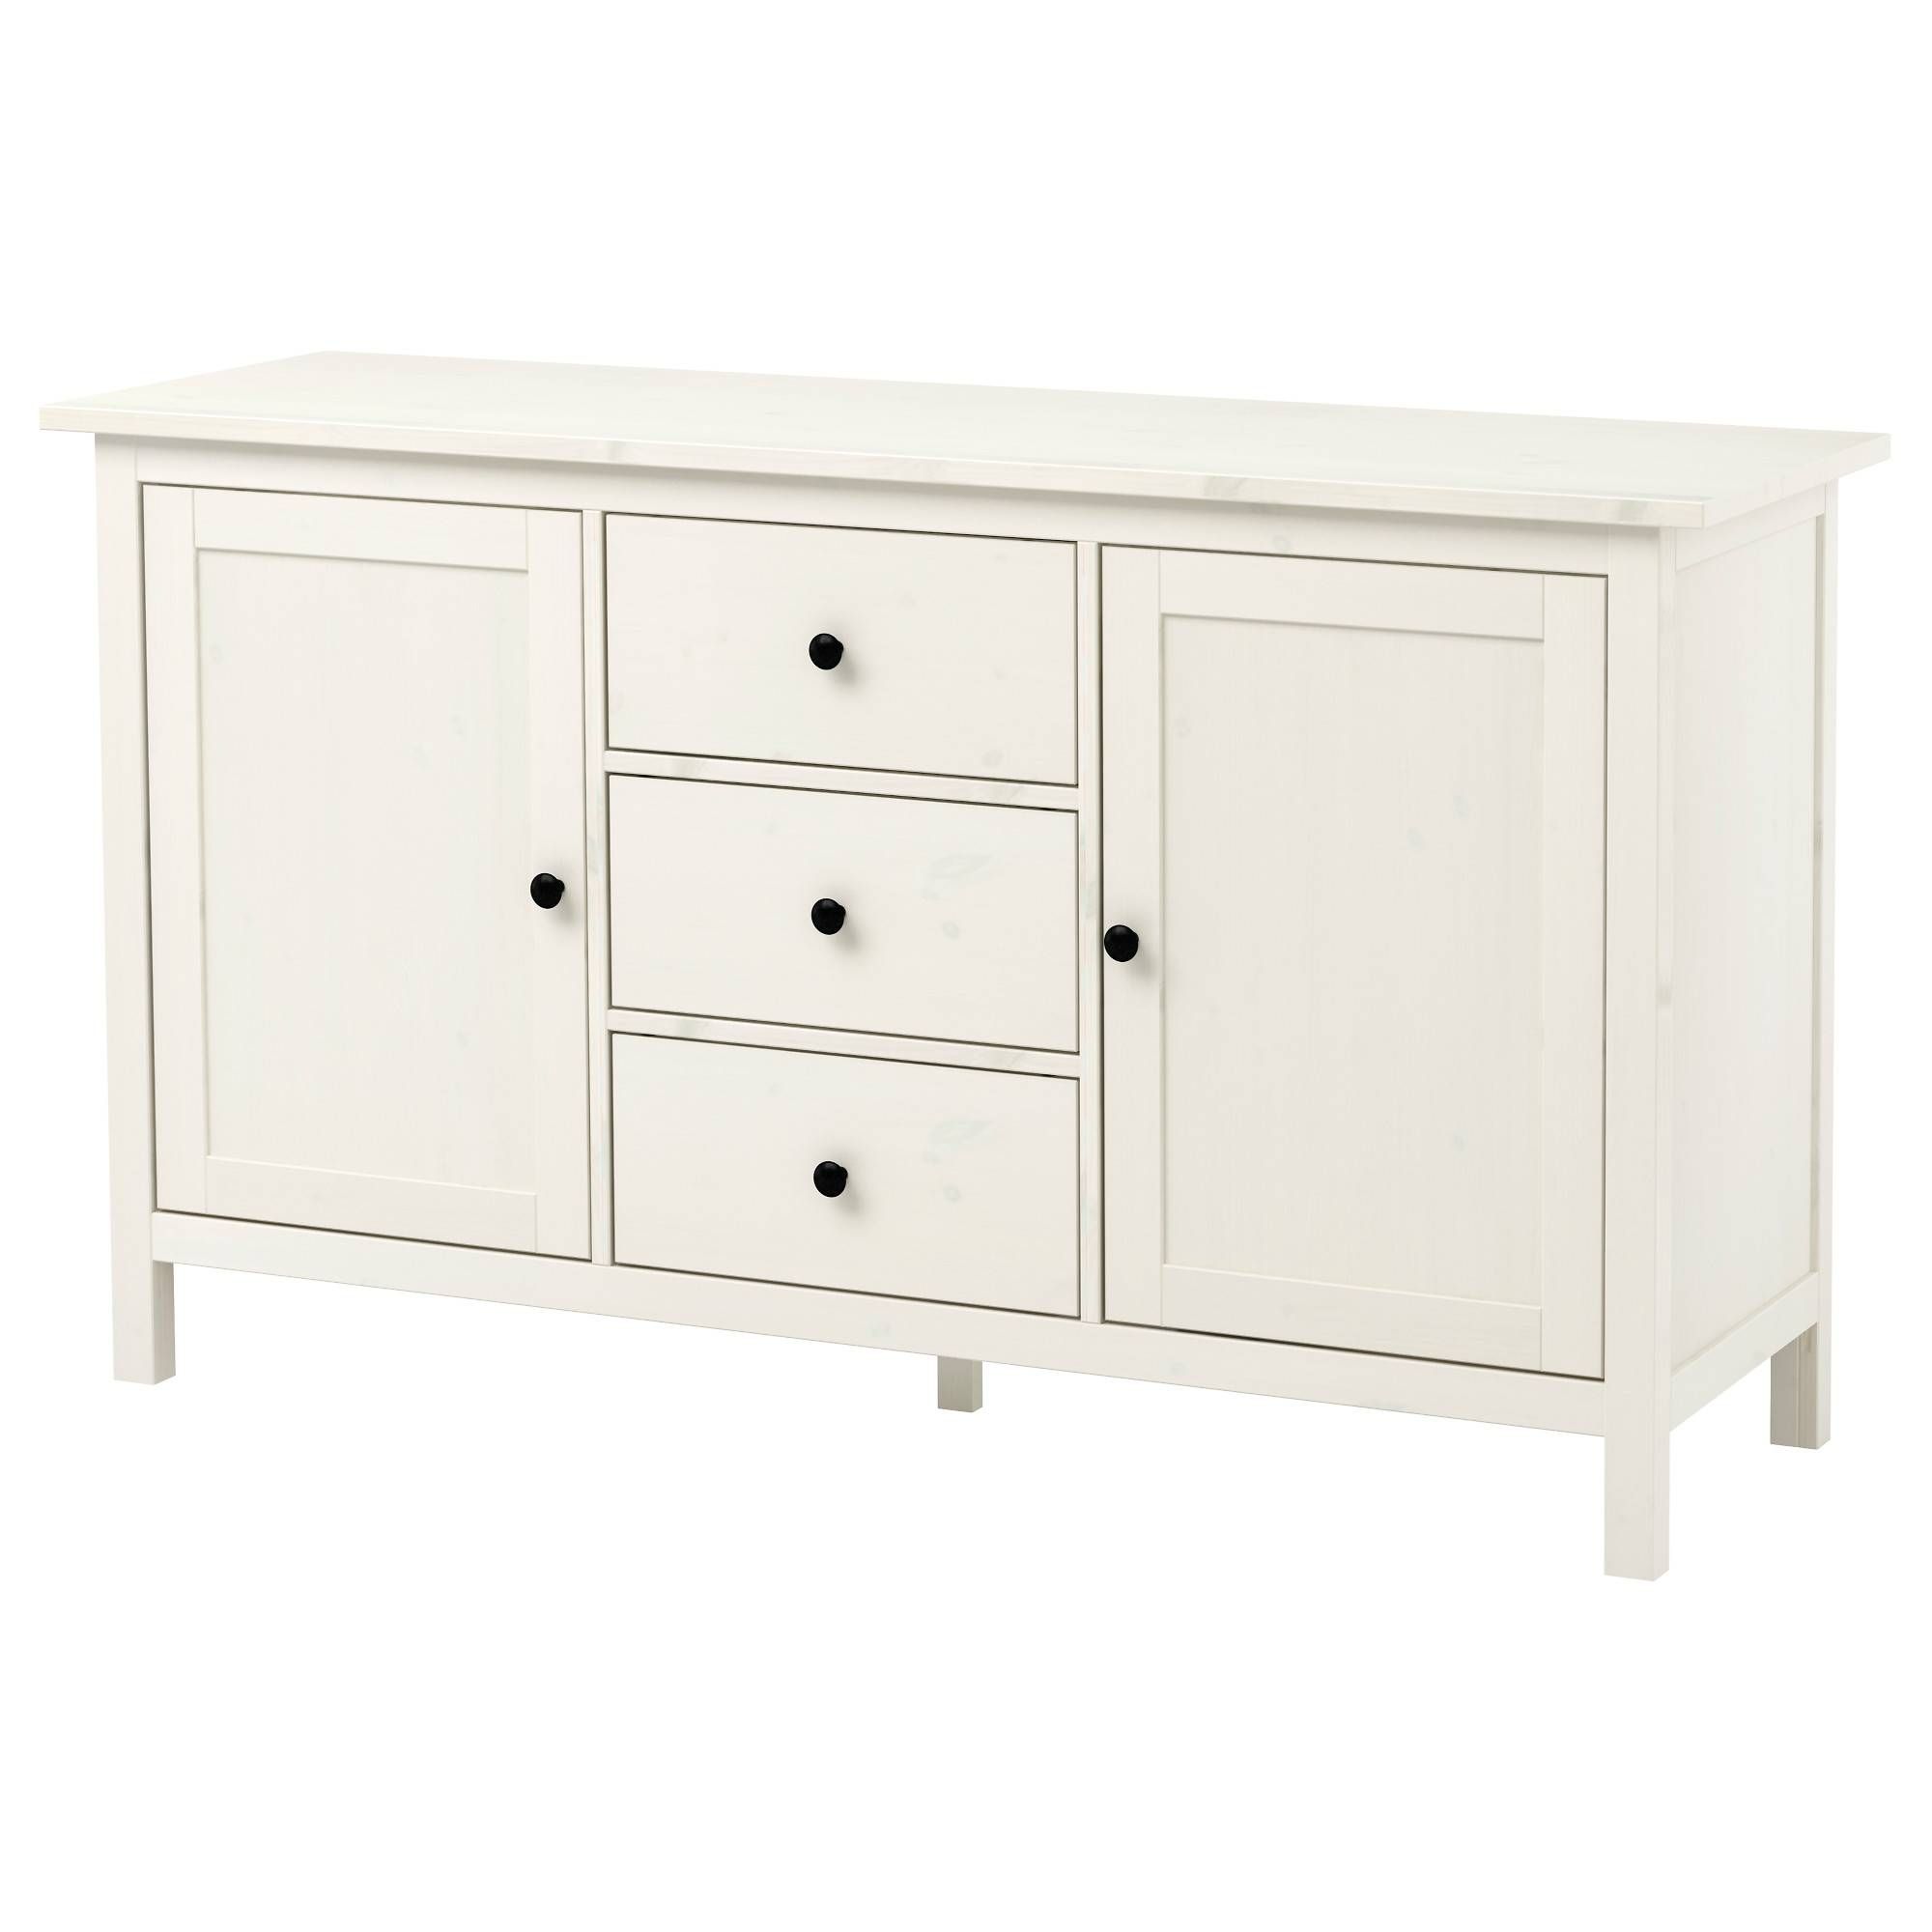 Hemnes Sideboard – White Stain – Ikea Inside Credenza Buffet Sideboards (View 14 of 15)